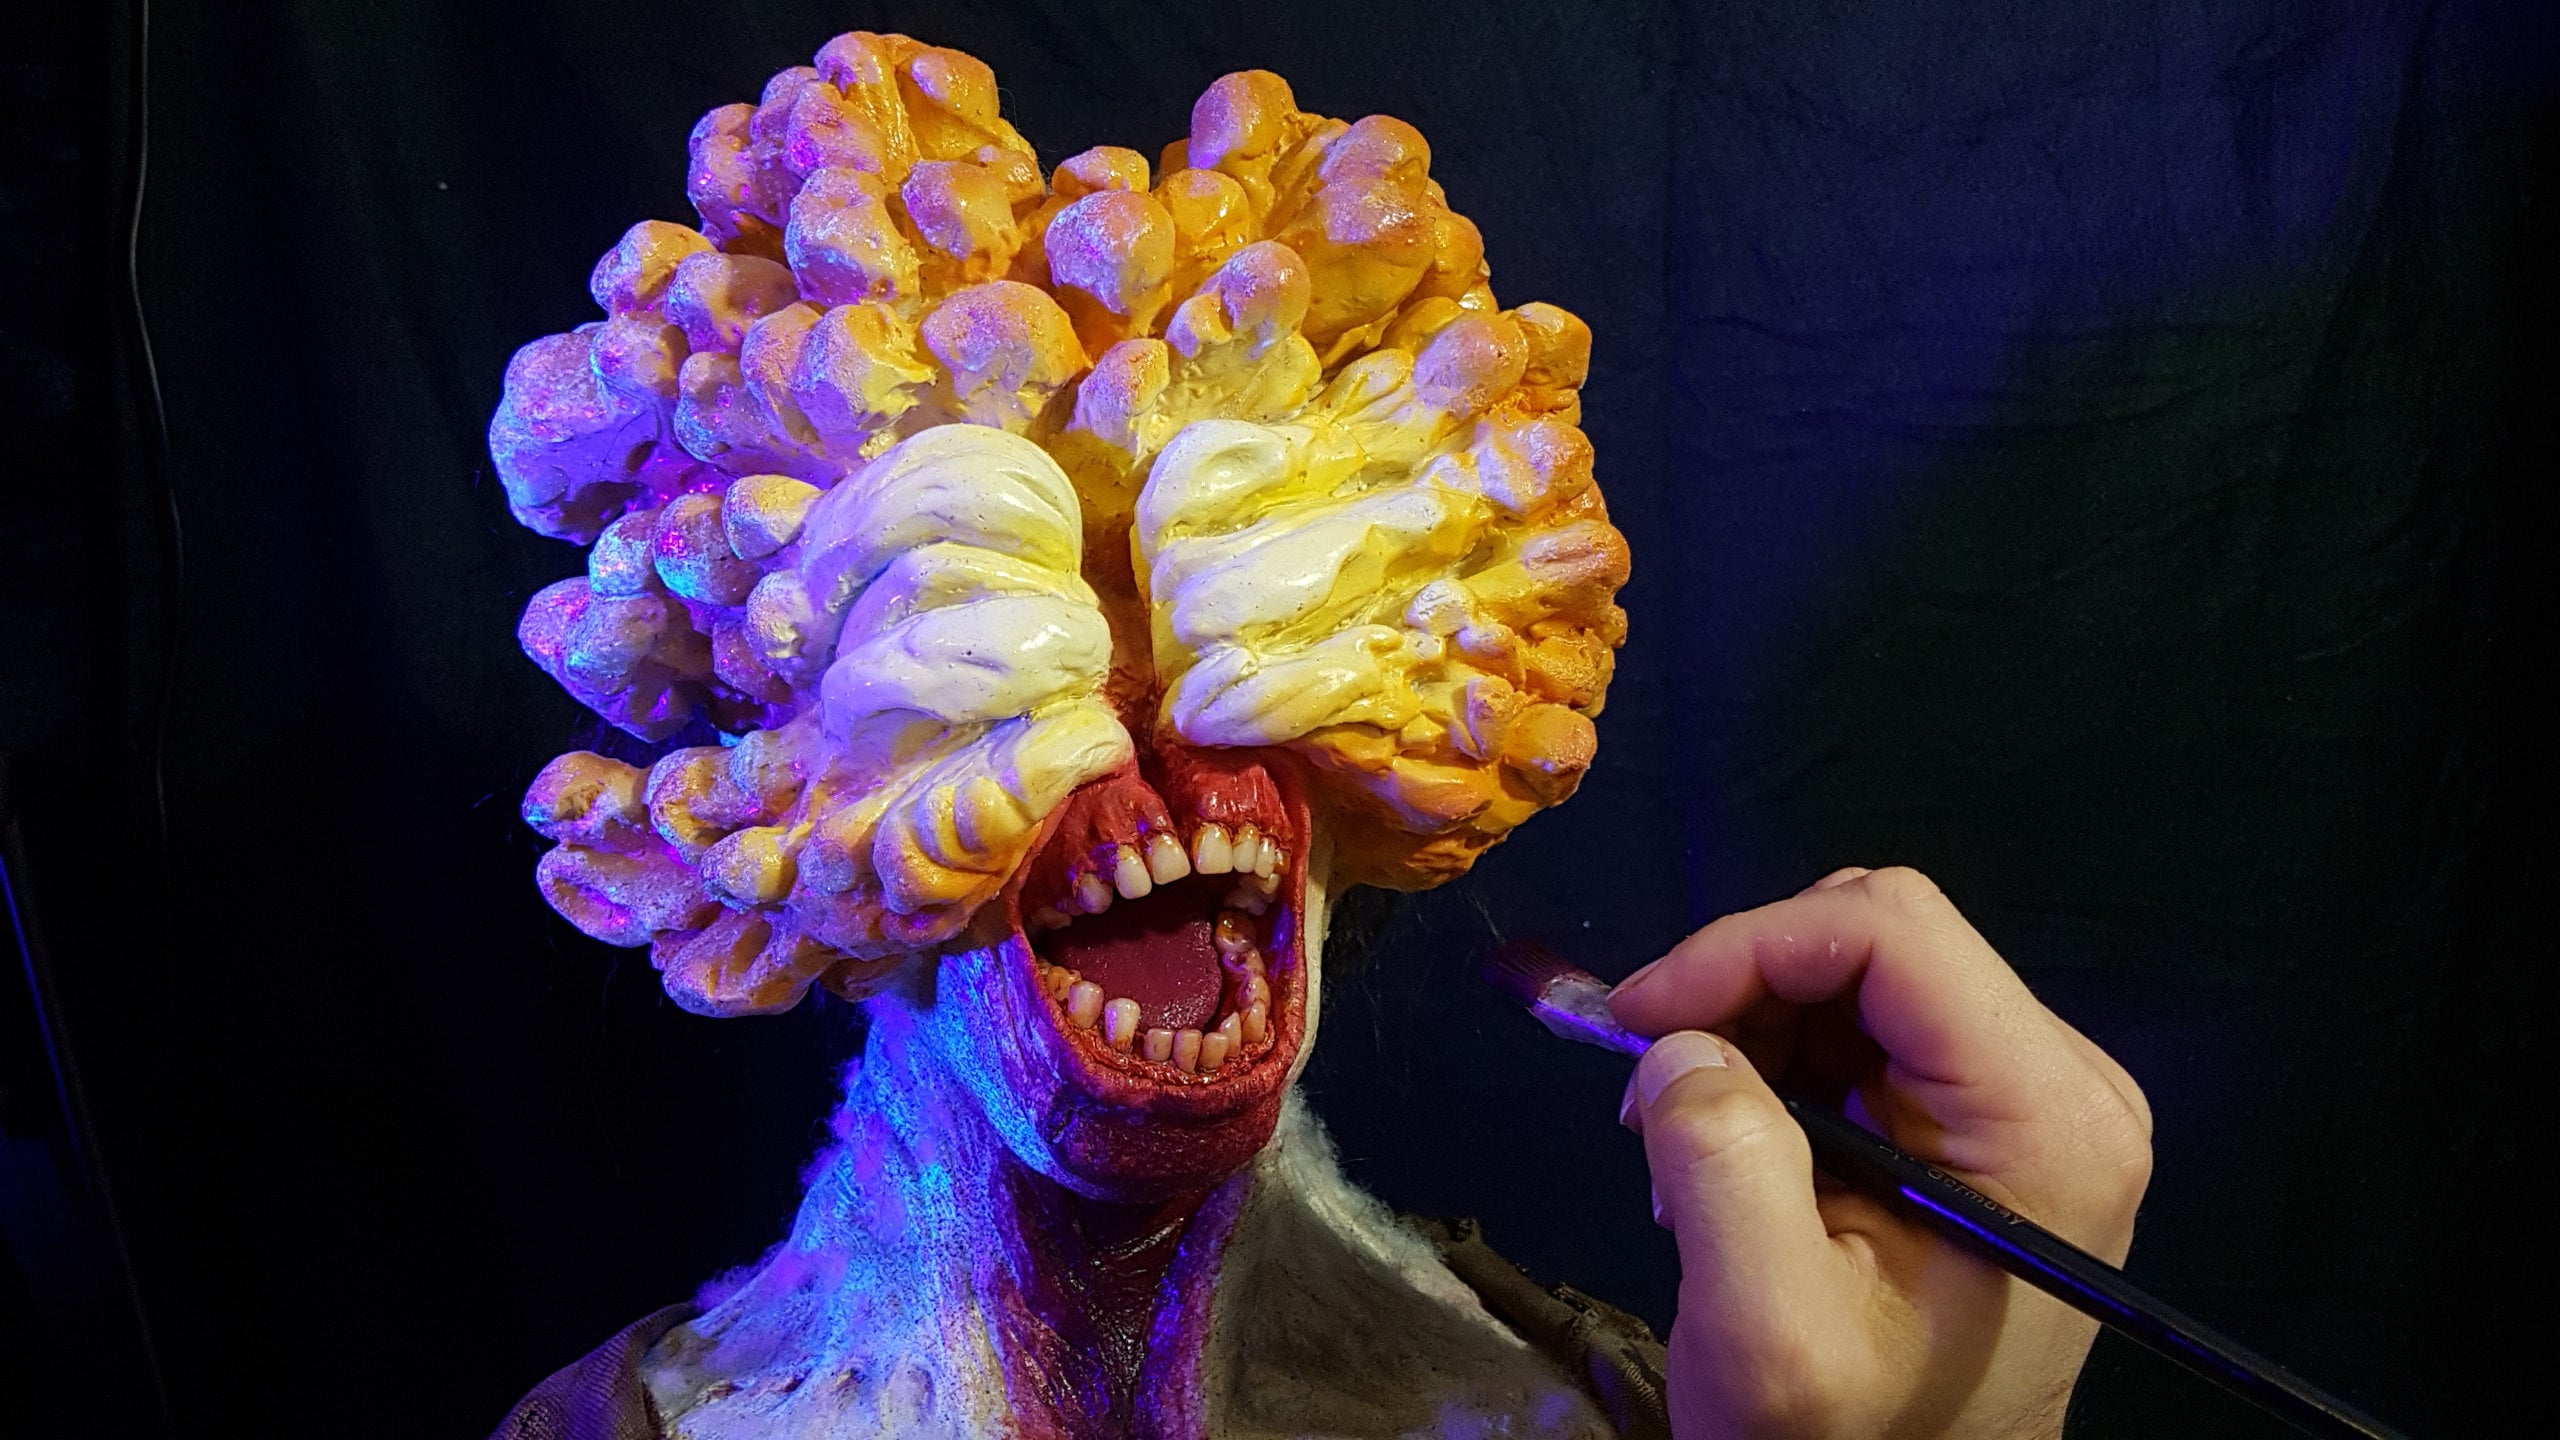 This amazing The Last of Us Clicker bust is a cake!